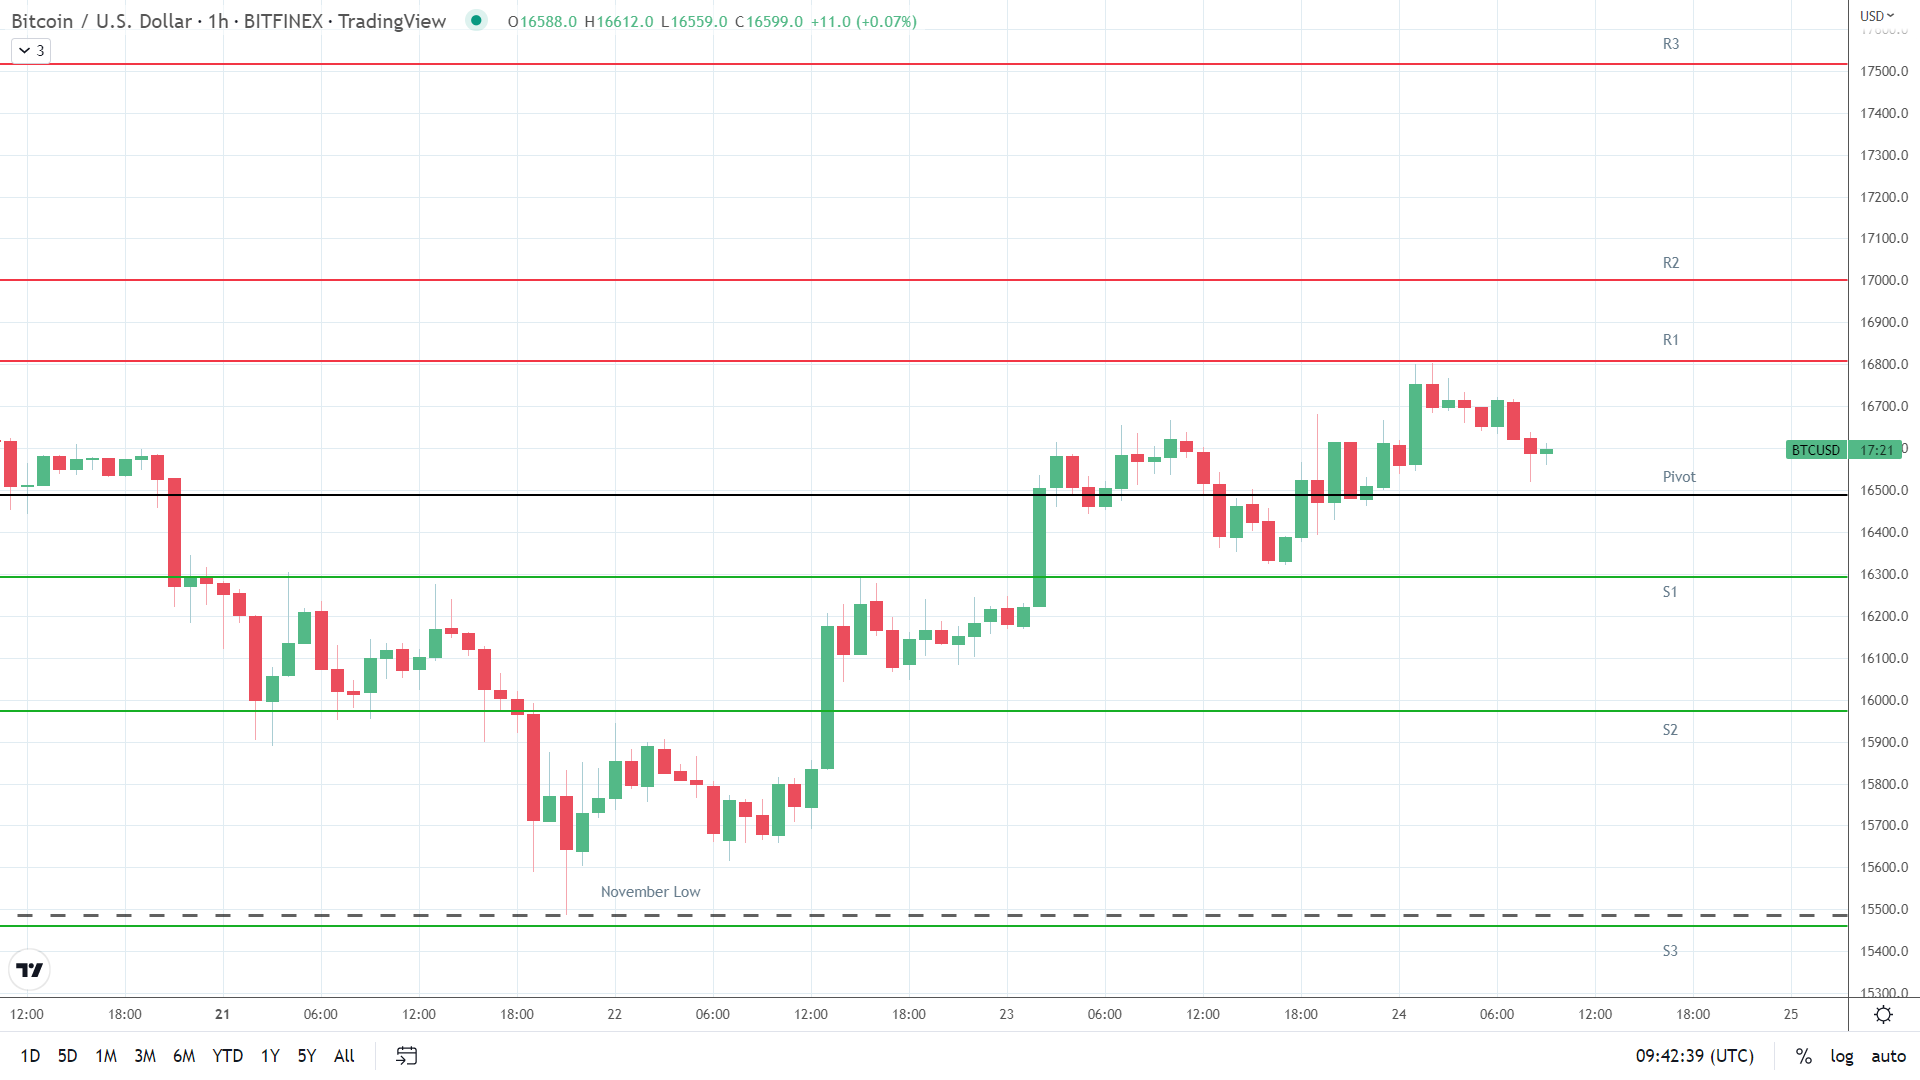 BTC resistance levels in play above the pivot.